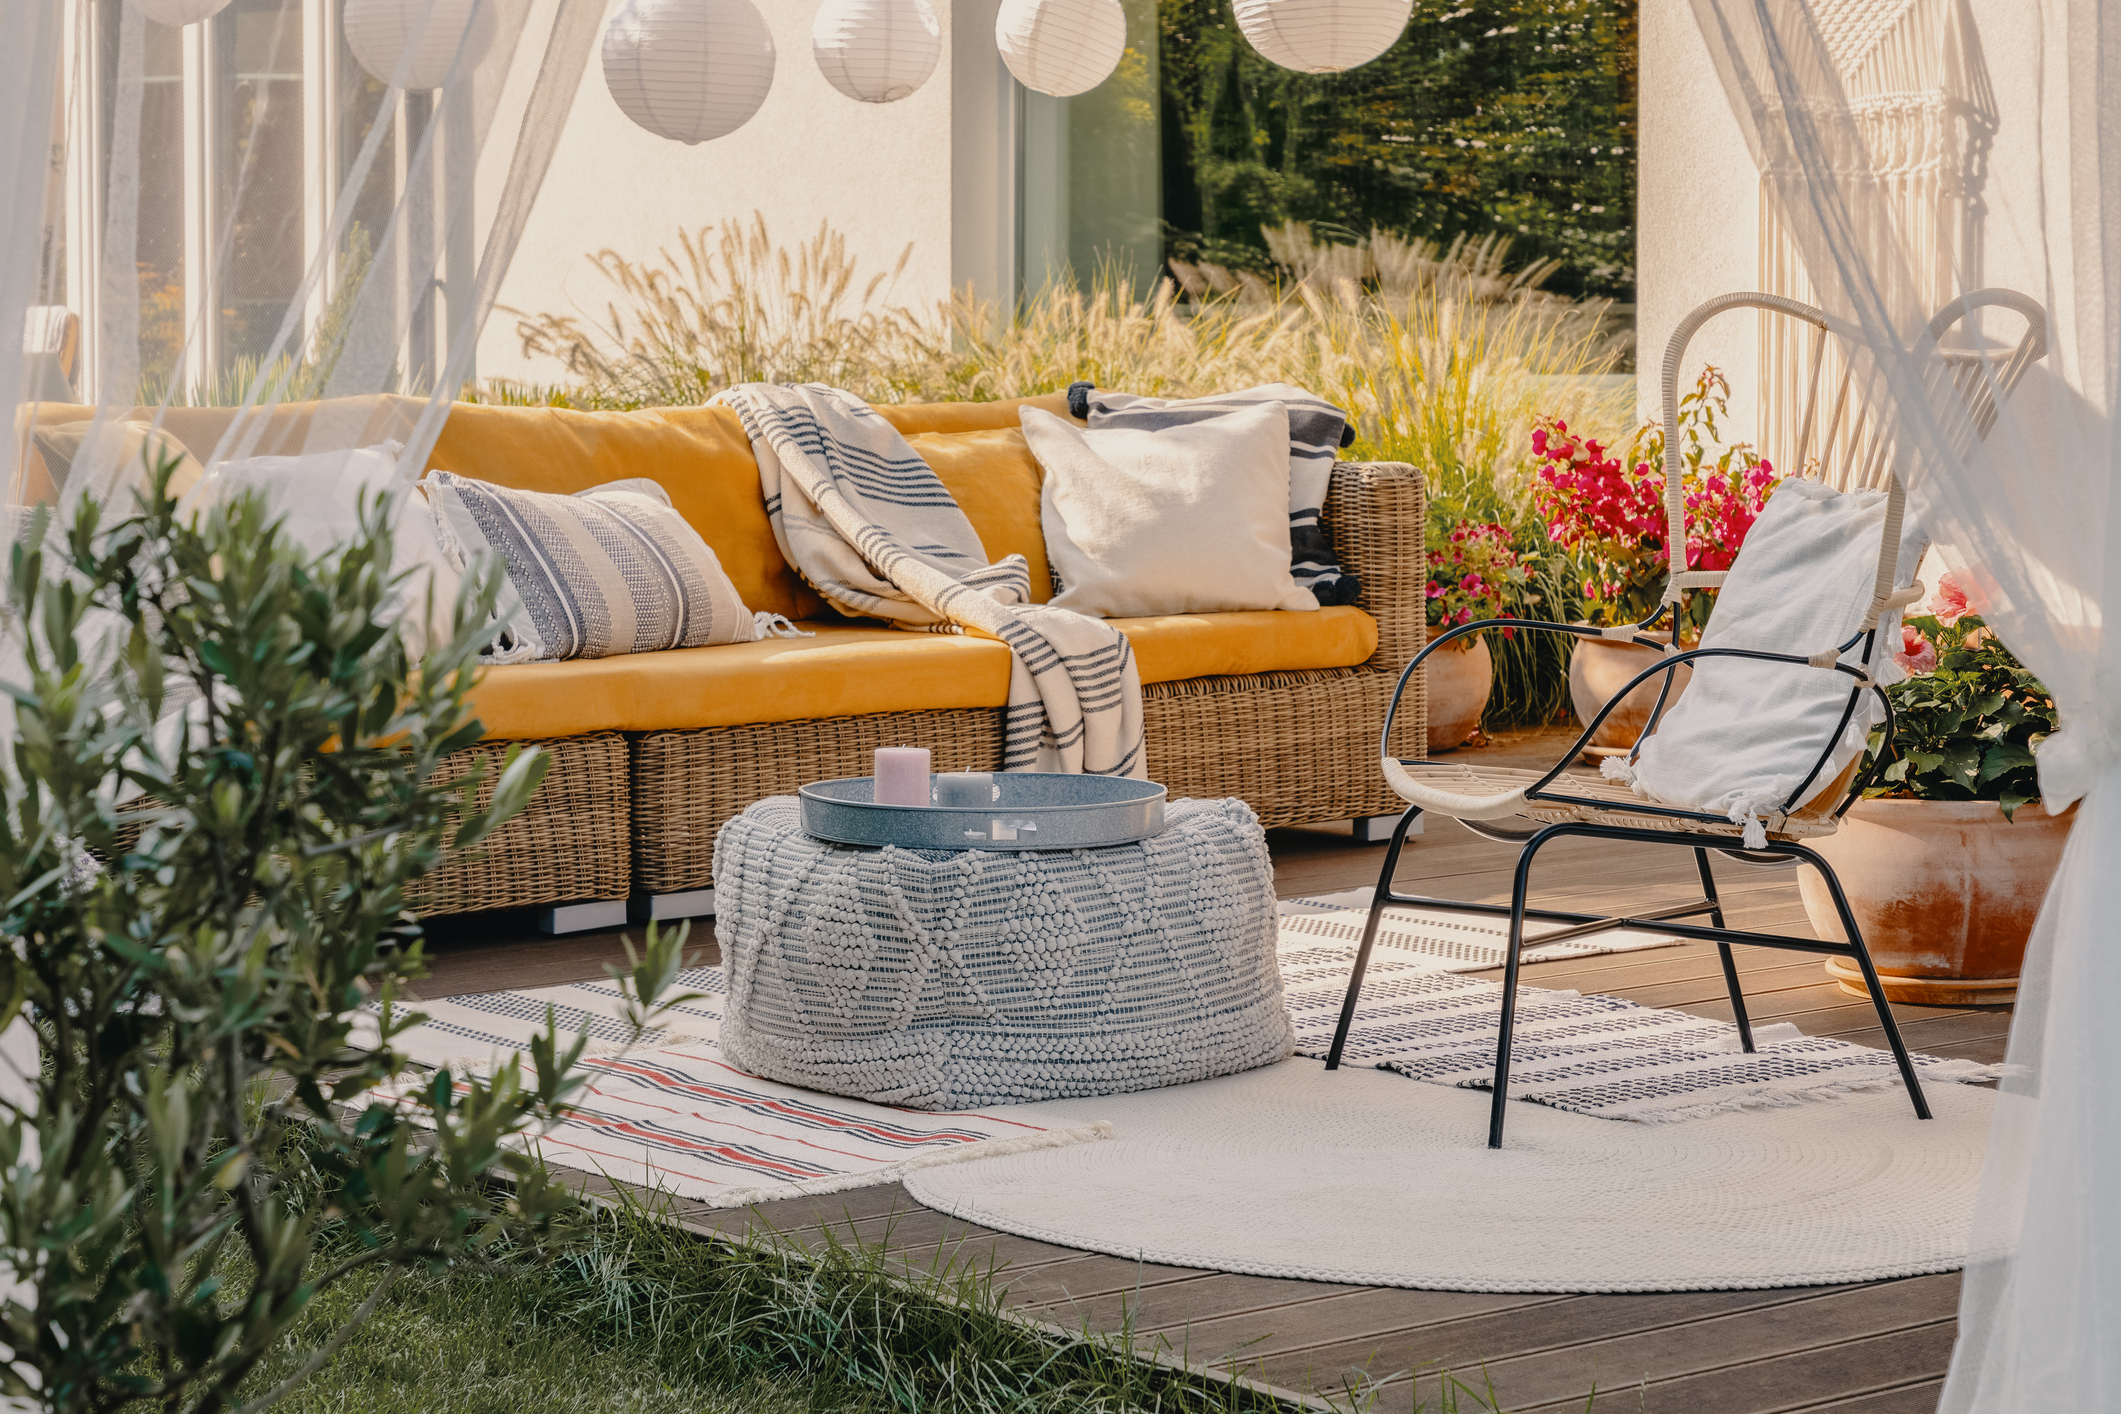 Incredible Outdoor Furnishings You Can Craft at Home